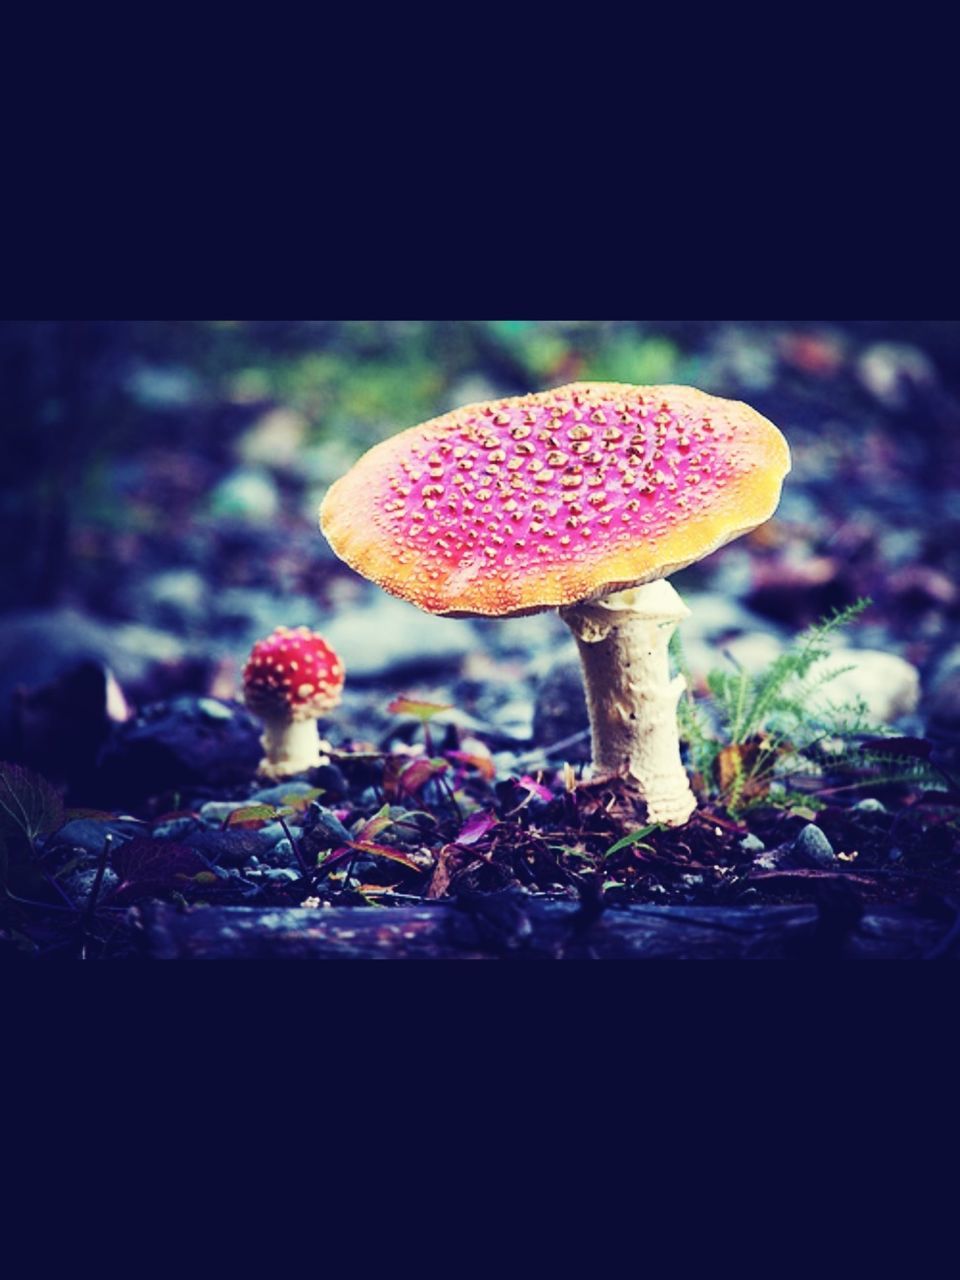 freshness, close-up, food and drink, red, focus on foreground, food, indoors, mushroom, flower, transfer print, fruit, pink color, fragility, growth, still life, no people, auto post production filter, fungus, sweet food, strawberry